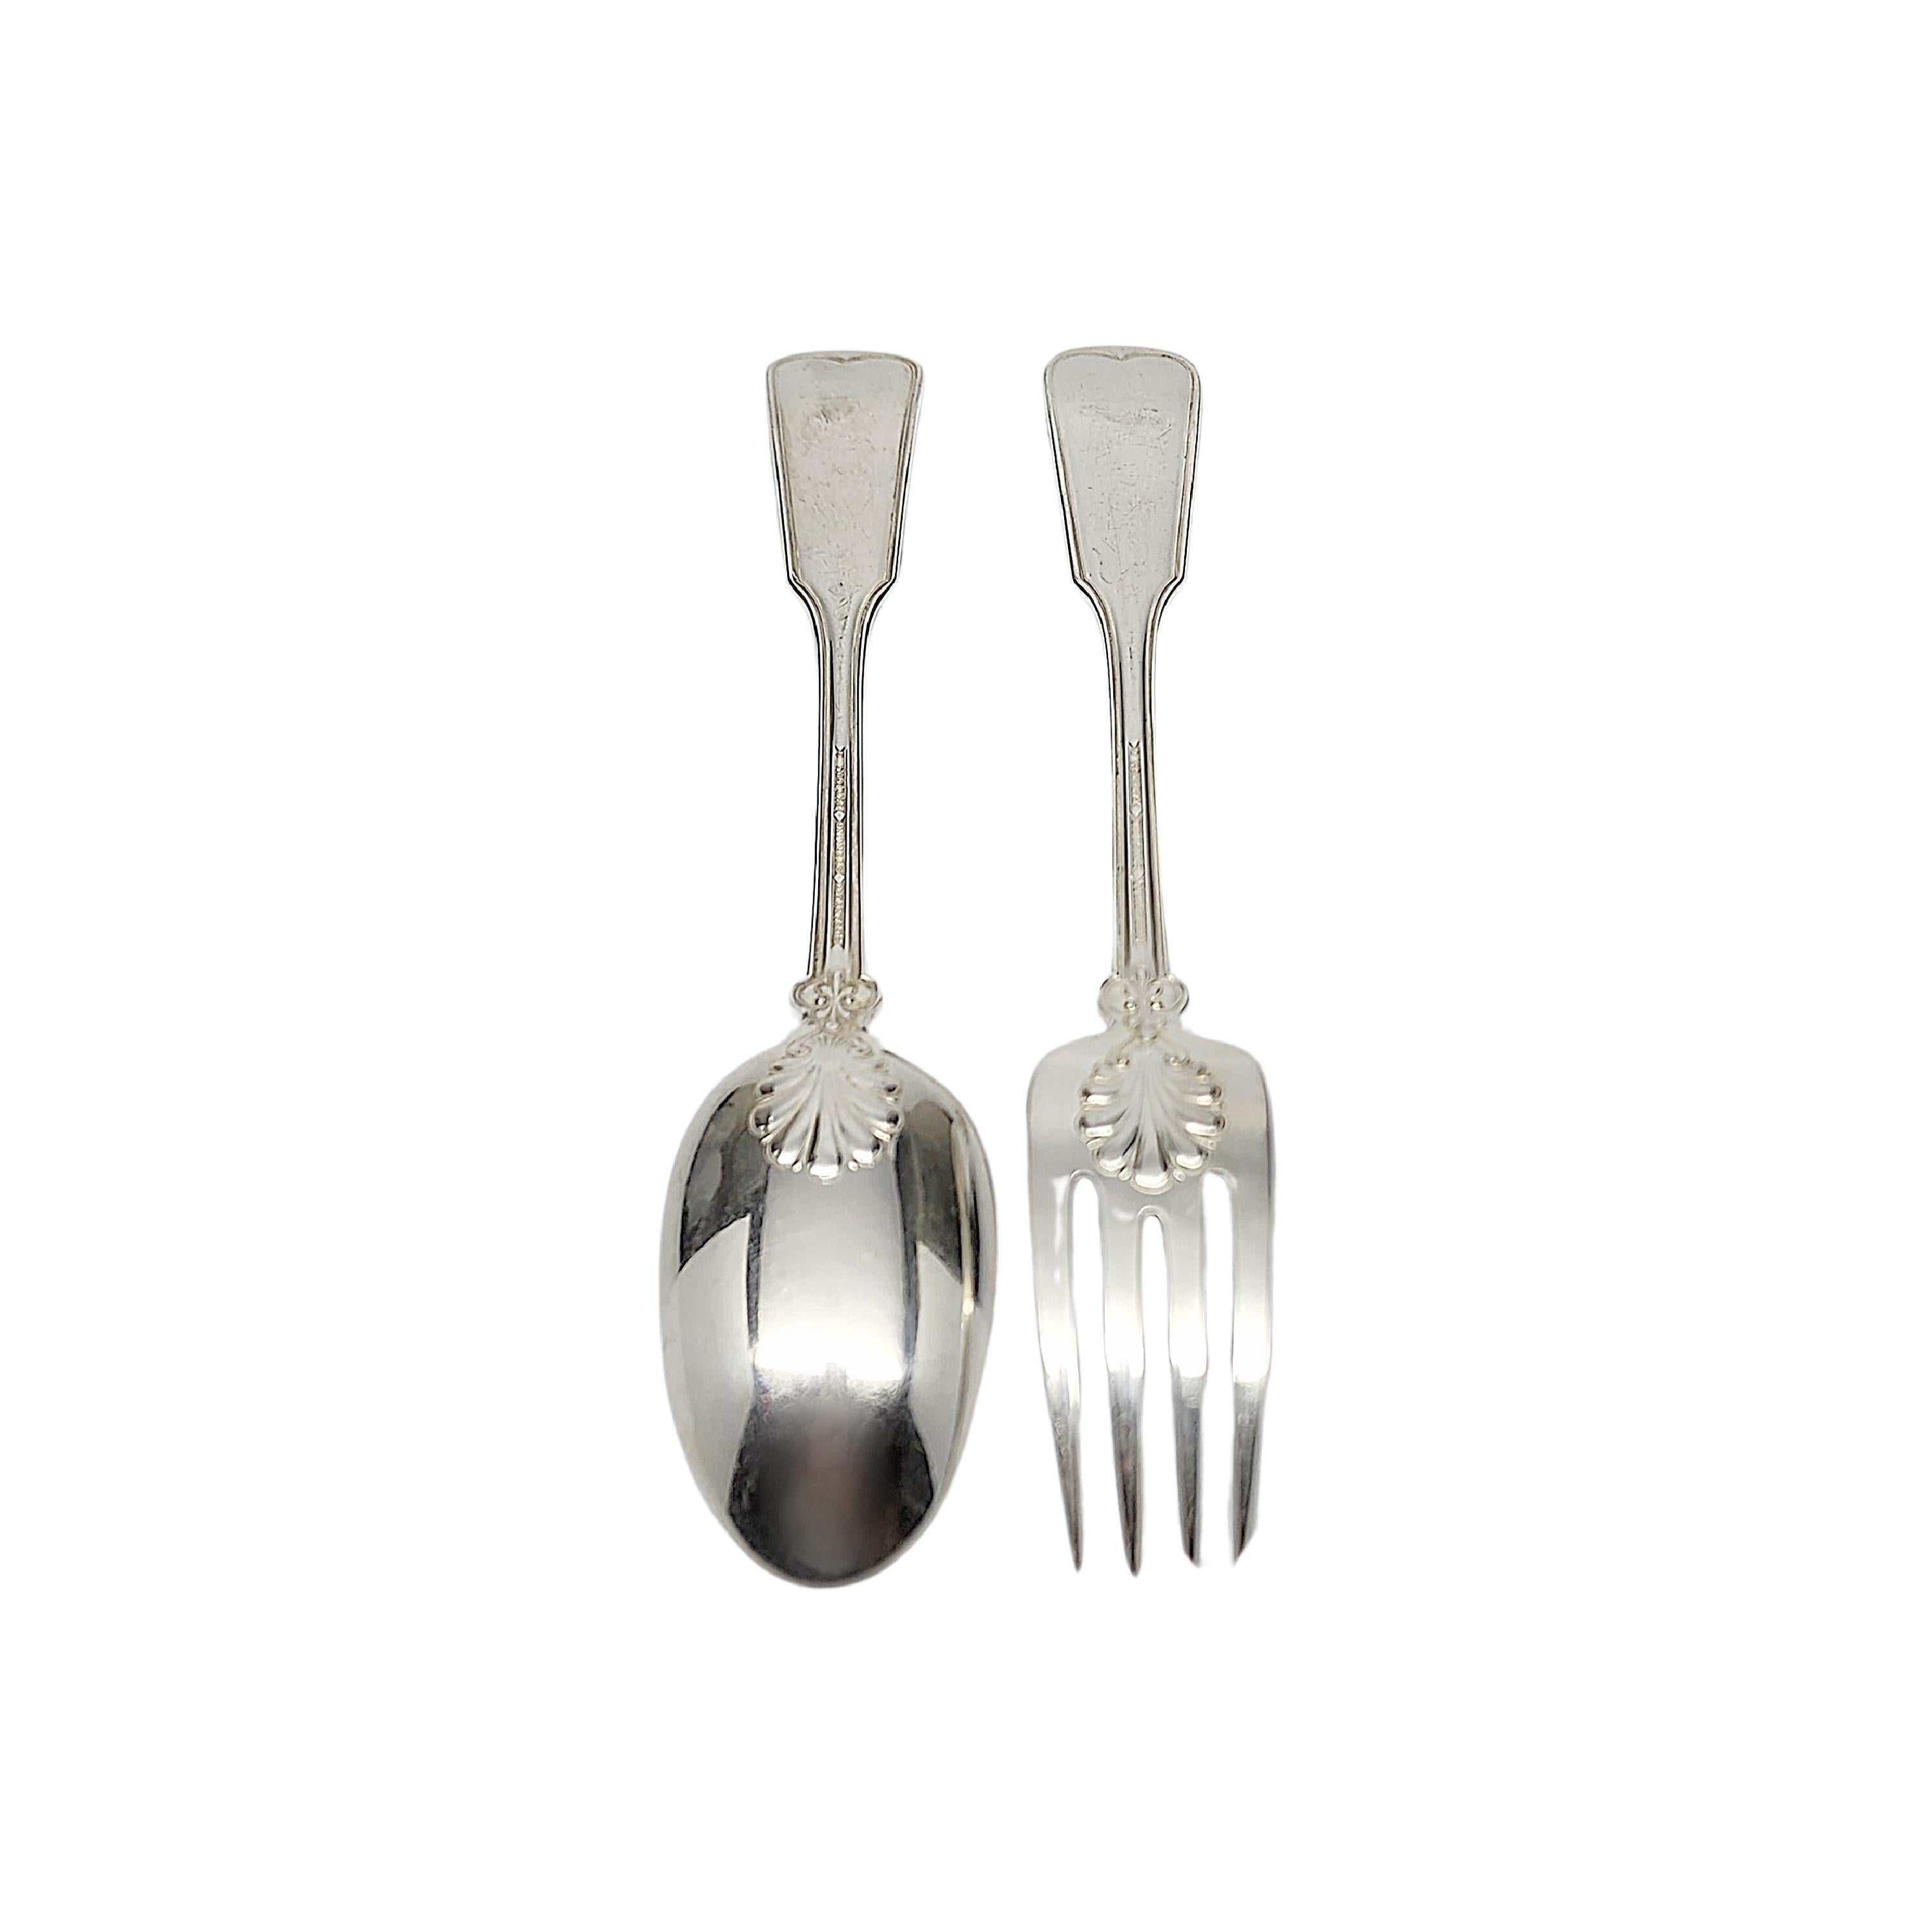 2 piece serving set including a sterling silver serving spoon and fork in the Shell & Thread pattern by Tiffany & Co with monogram.

Monogram appears to be C

The Shell & Thread pattern was introduced in 1905 and continues to be one of the most